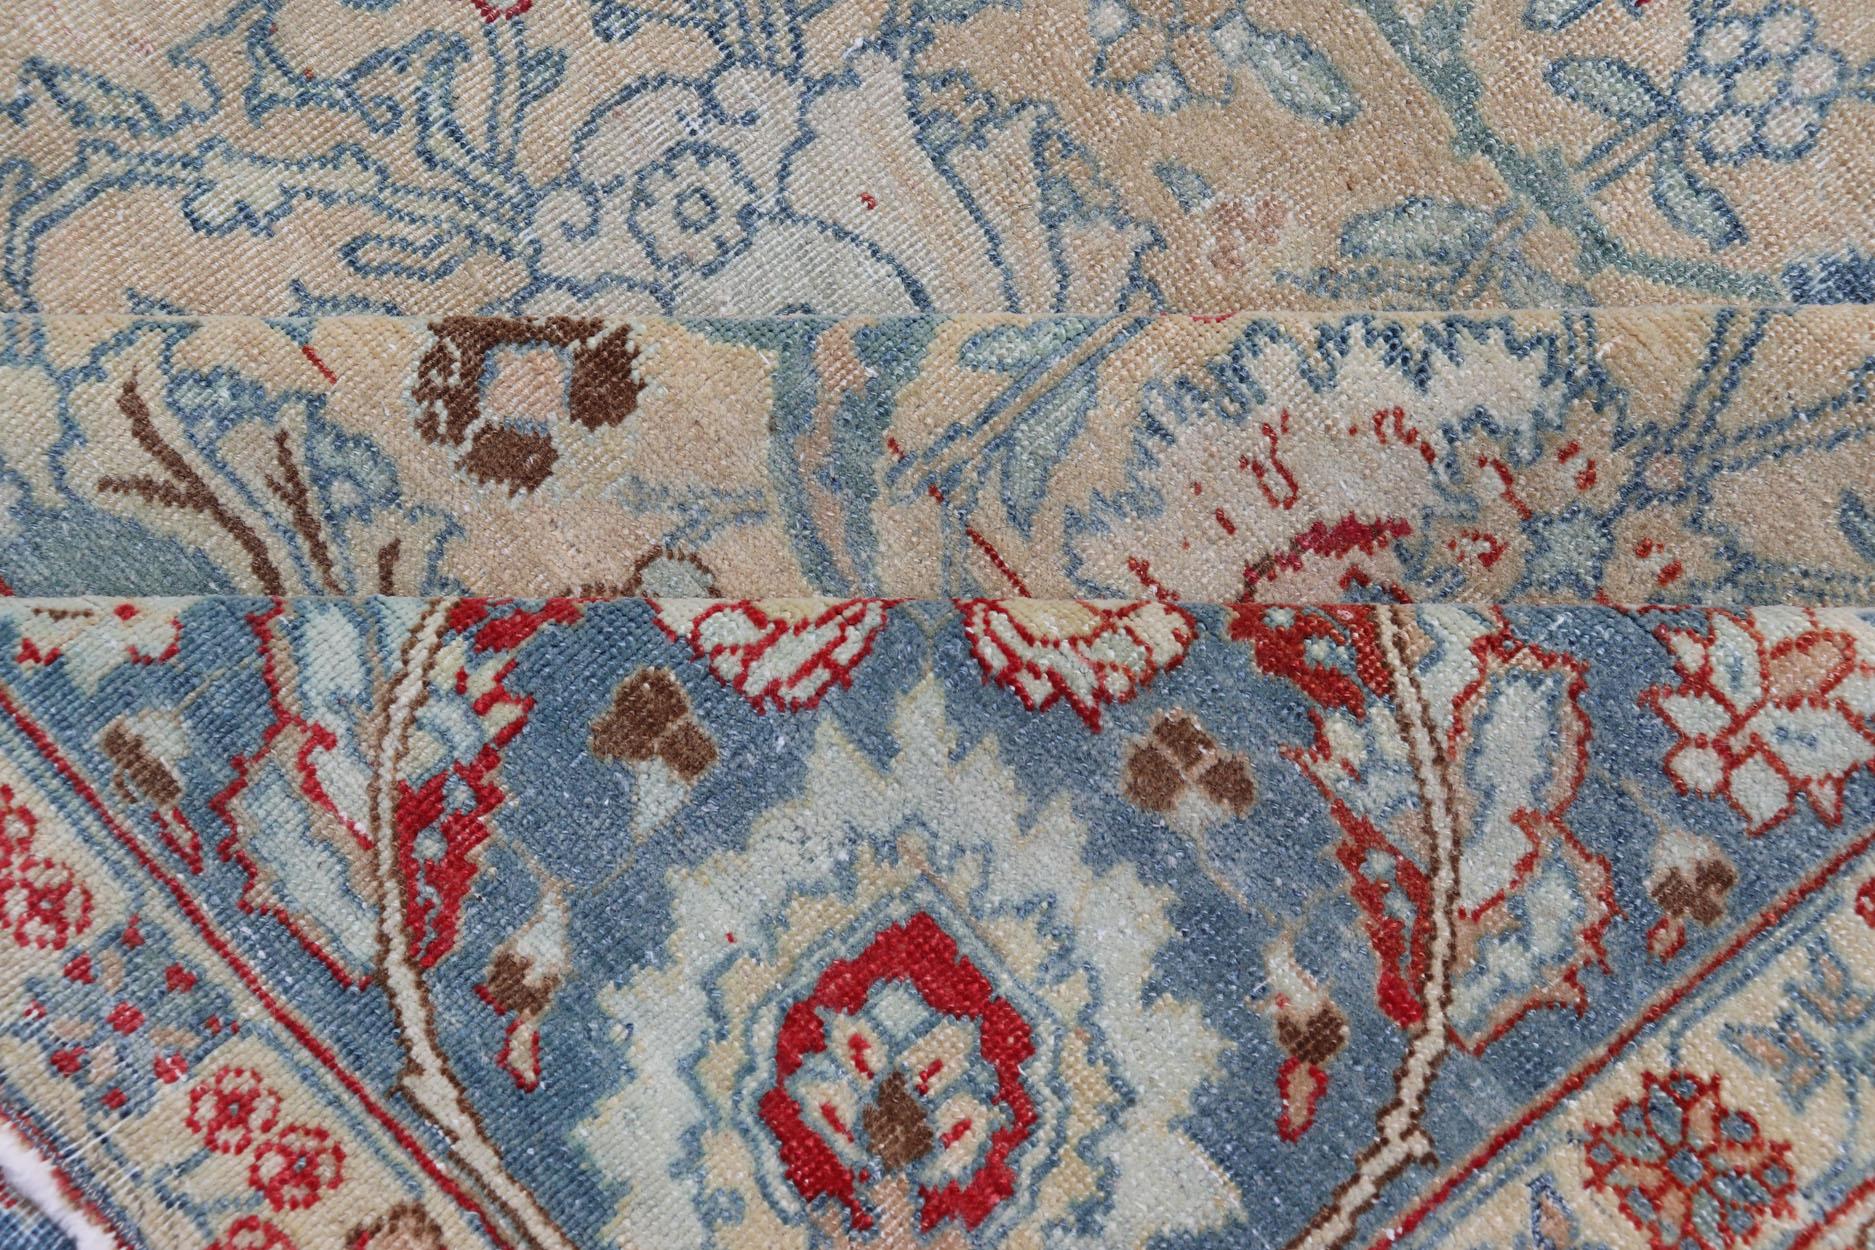  Antique Persian Khorassan Rug with Floral Design in Honey Cream & Dusty Blue For Sale 7